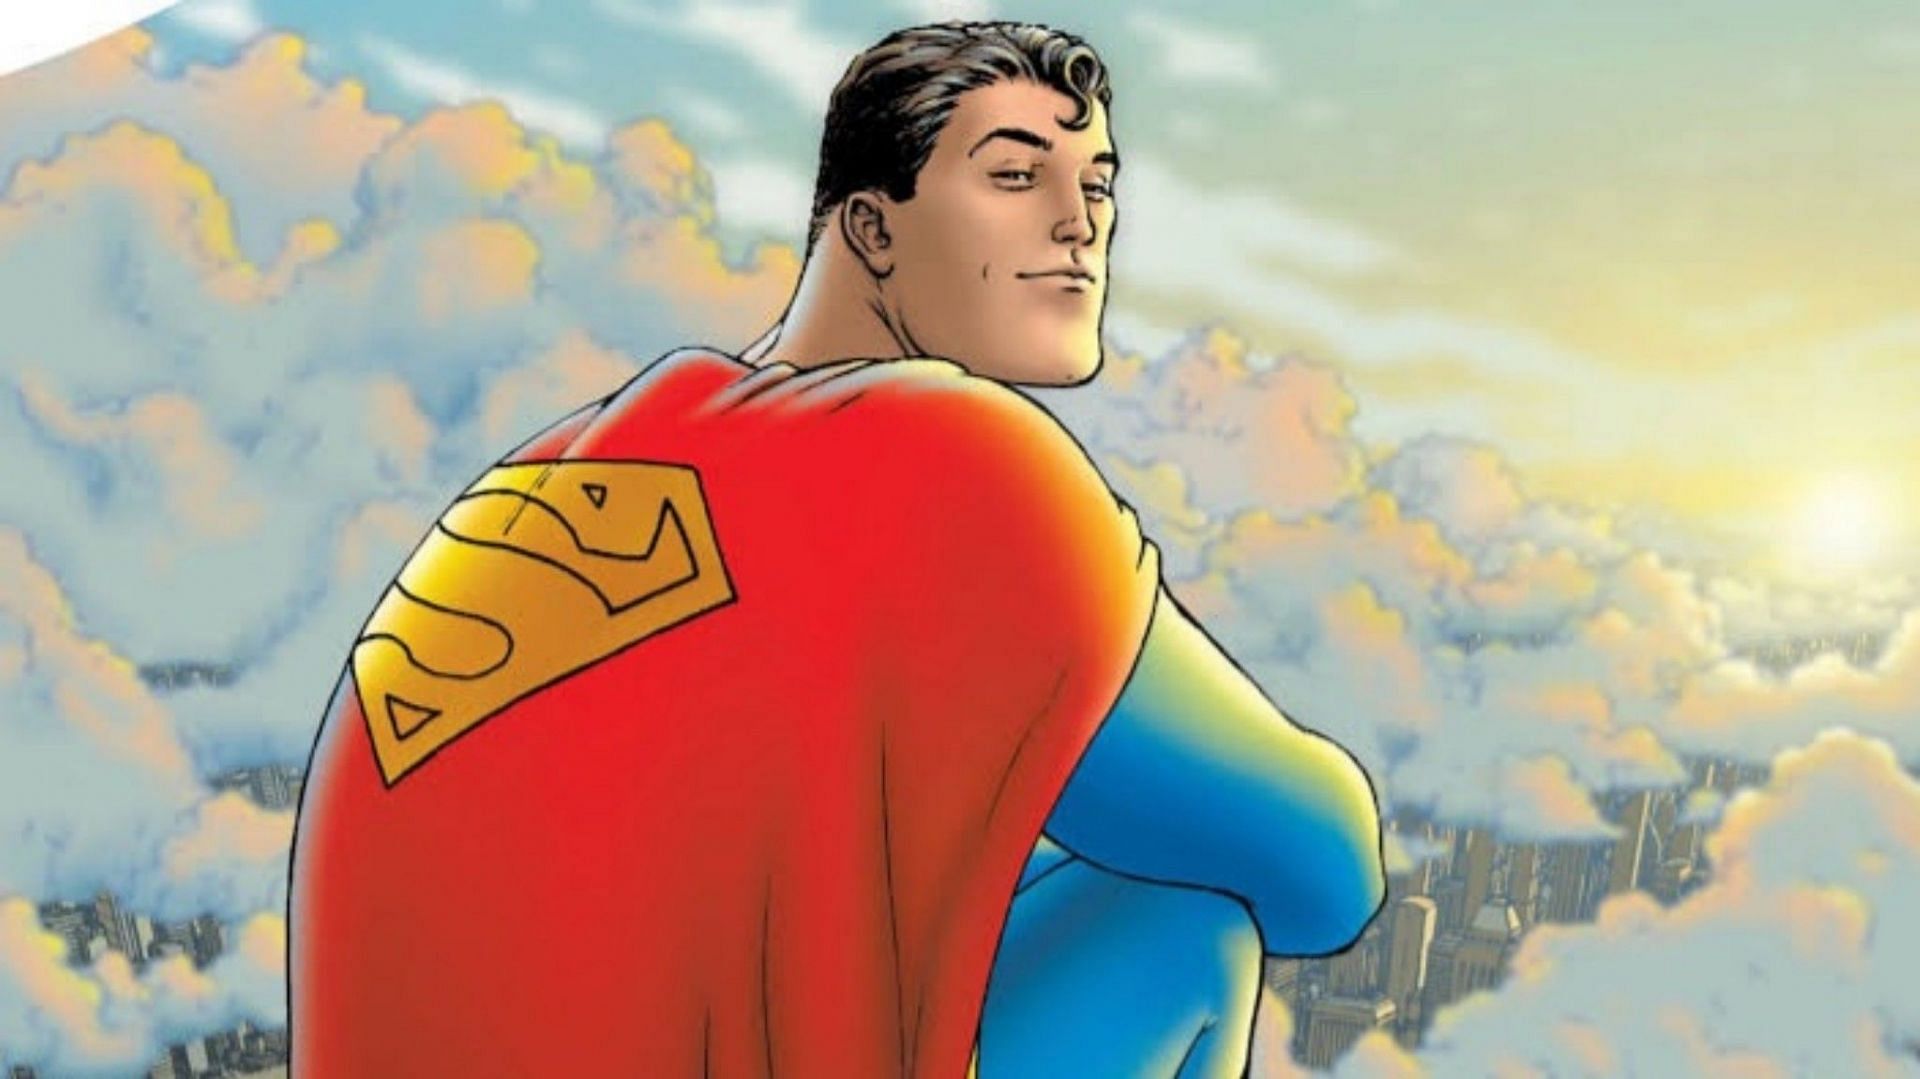 Kal-El sitting on top of a building on the cover for All-Star Superman (Image via DC Comics)